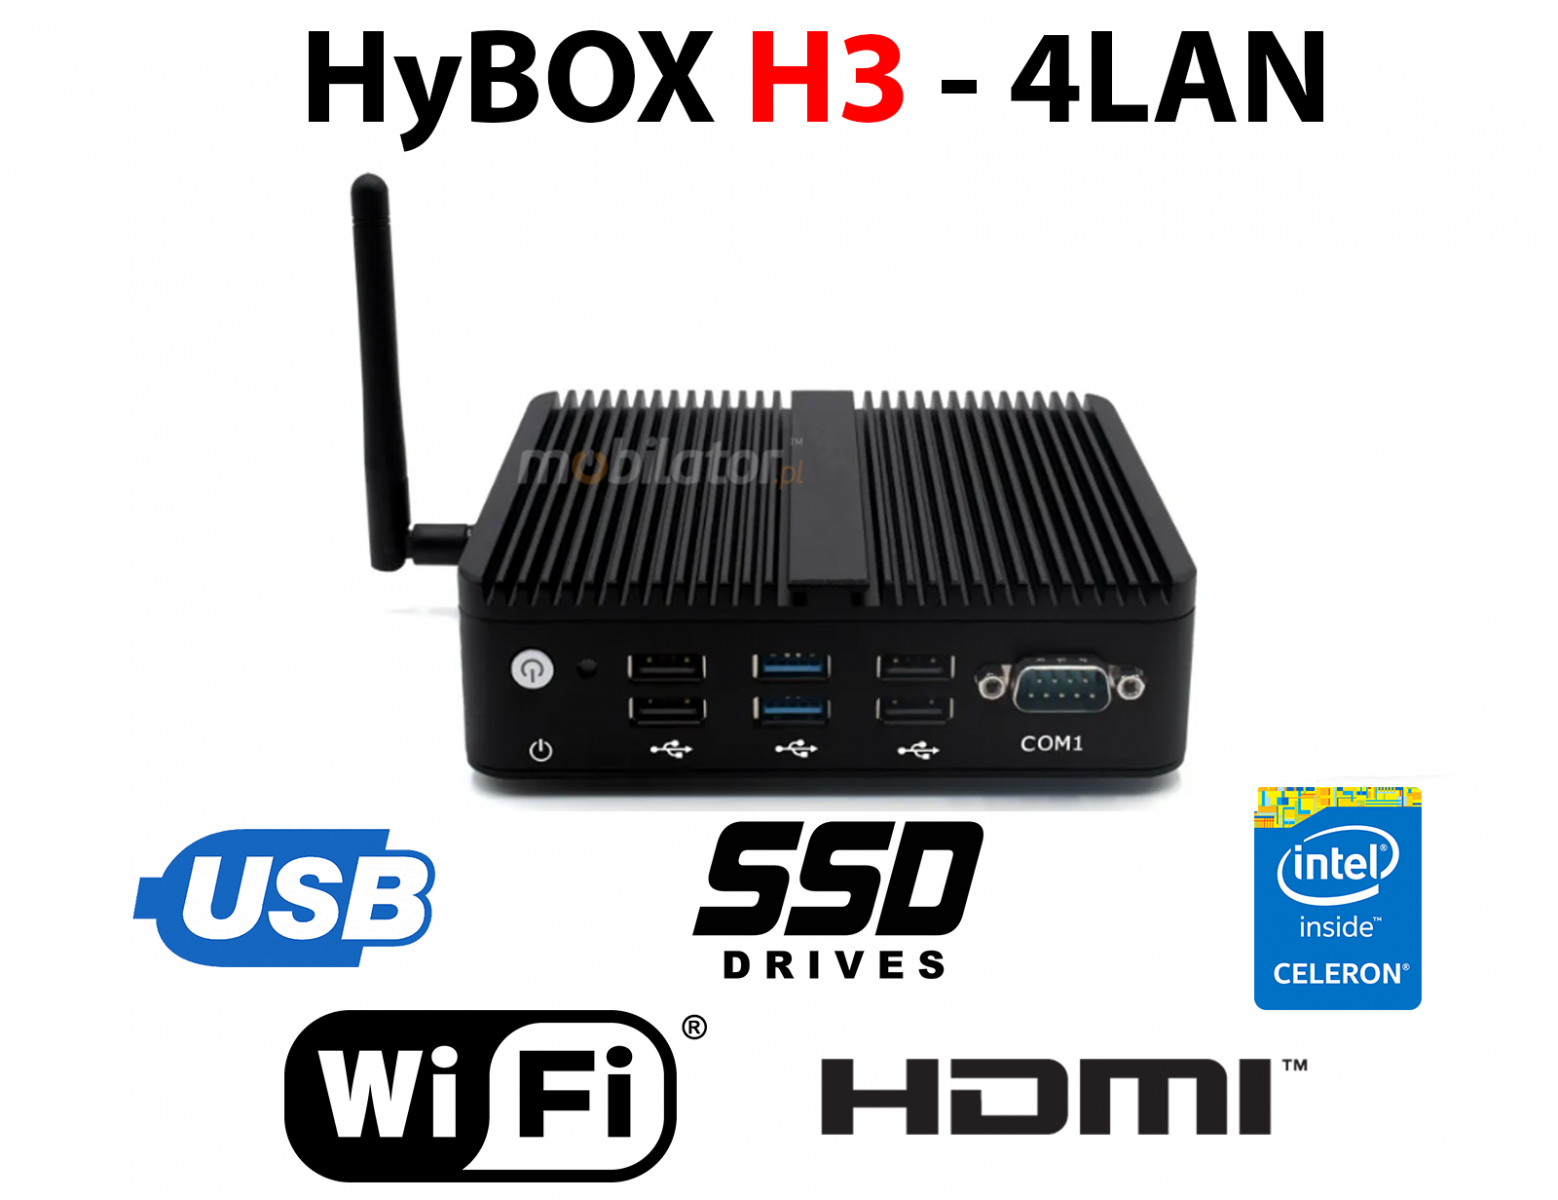 HyBOX H3-4LAN small reliable fast and efficient mini pc Linux